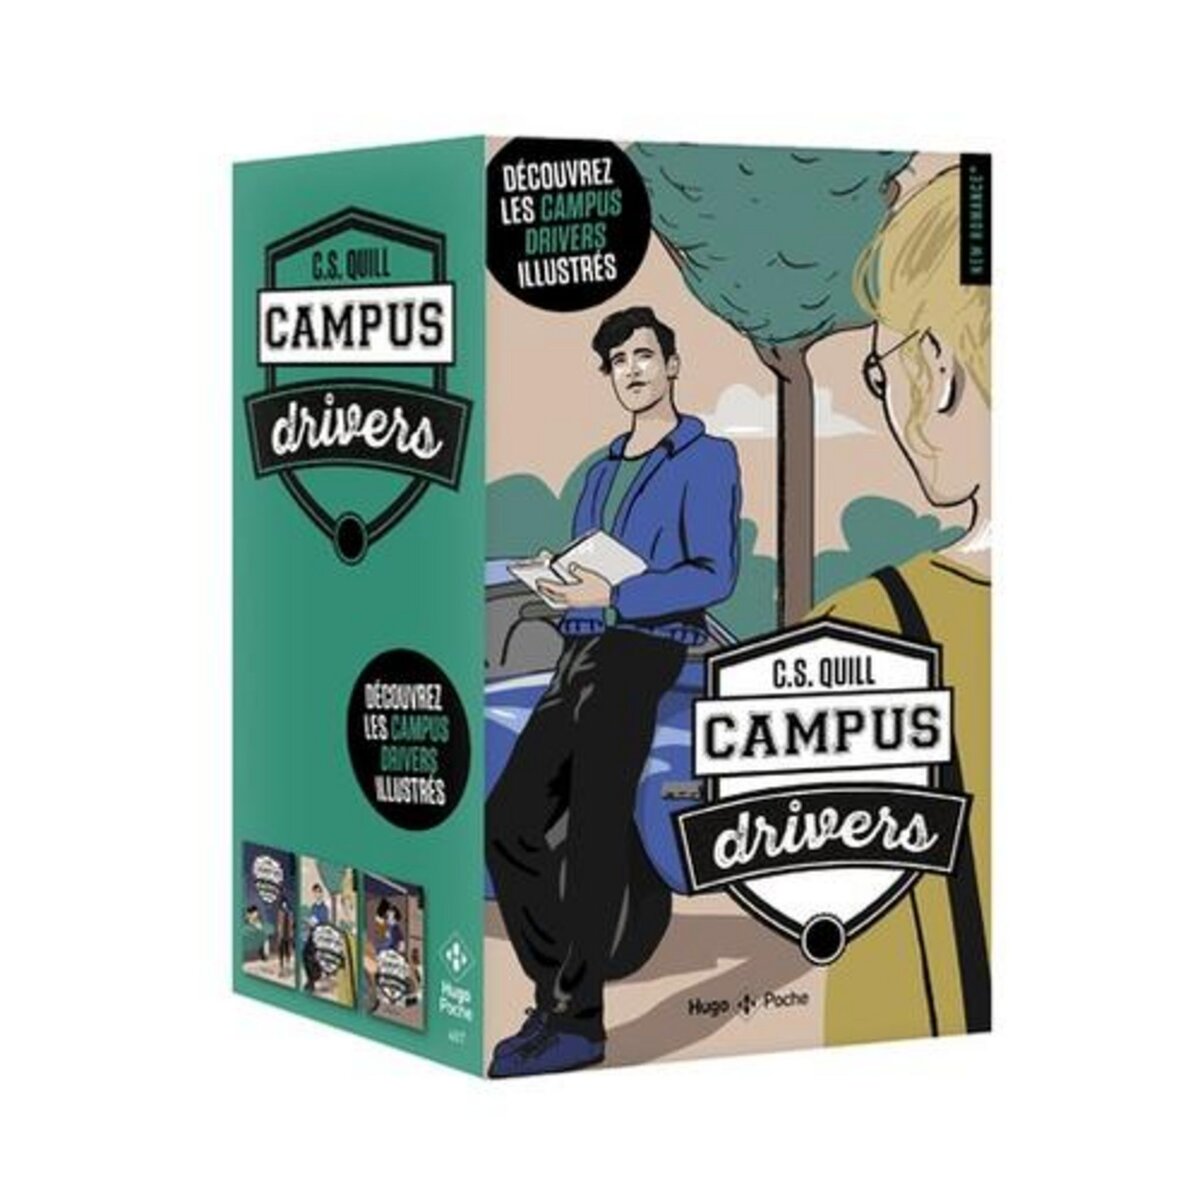 Campus drivers Tome 1 Supermad - C.S. Quill